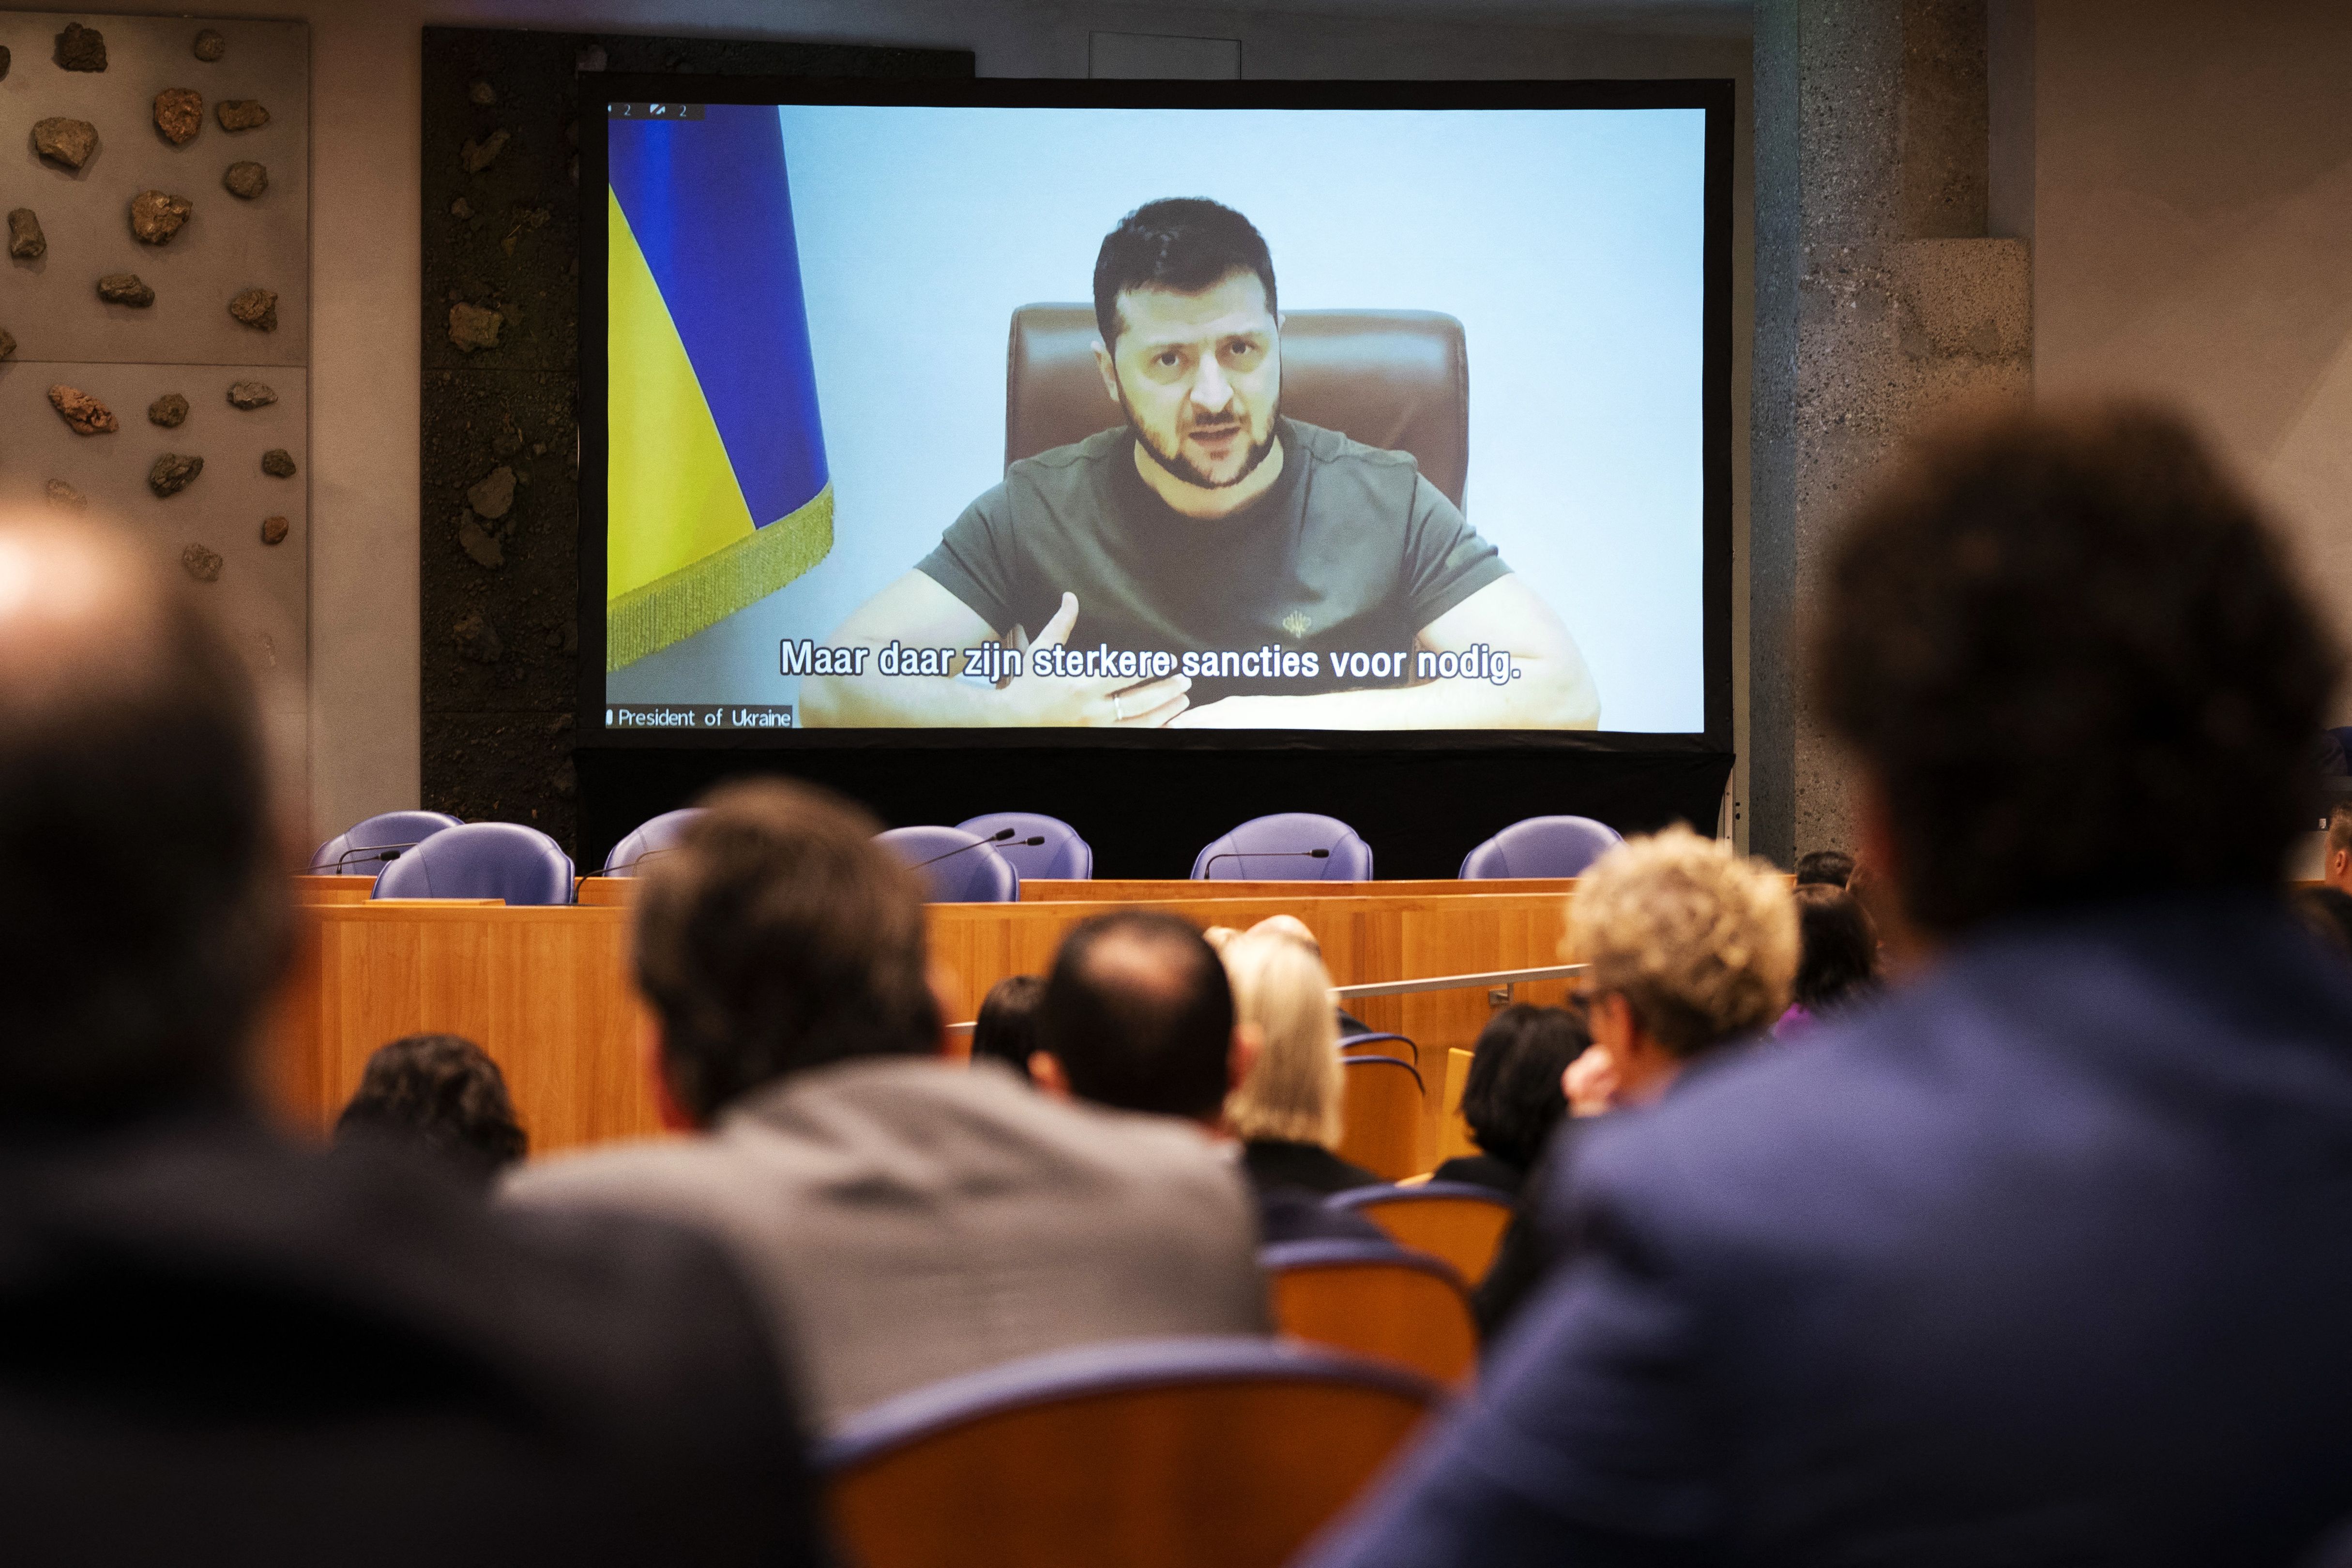 Ukrainian President Volodymyr Zelensky (on screen) addresses the Dutch House of Representatives in The Hague on March 31, in hopes of getting support in response to Russia's invasion of Ukraine. 